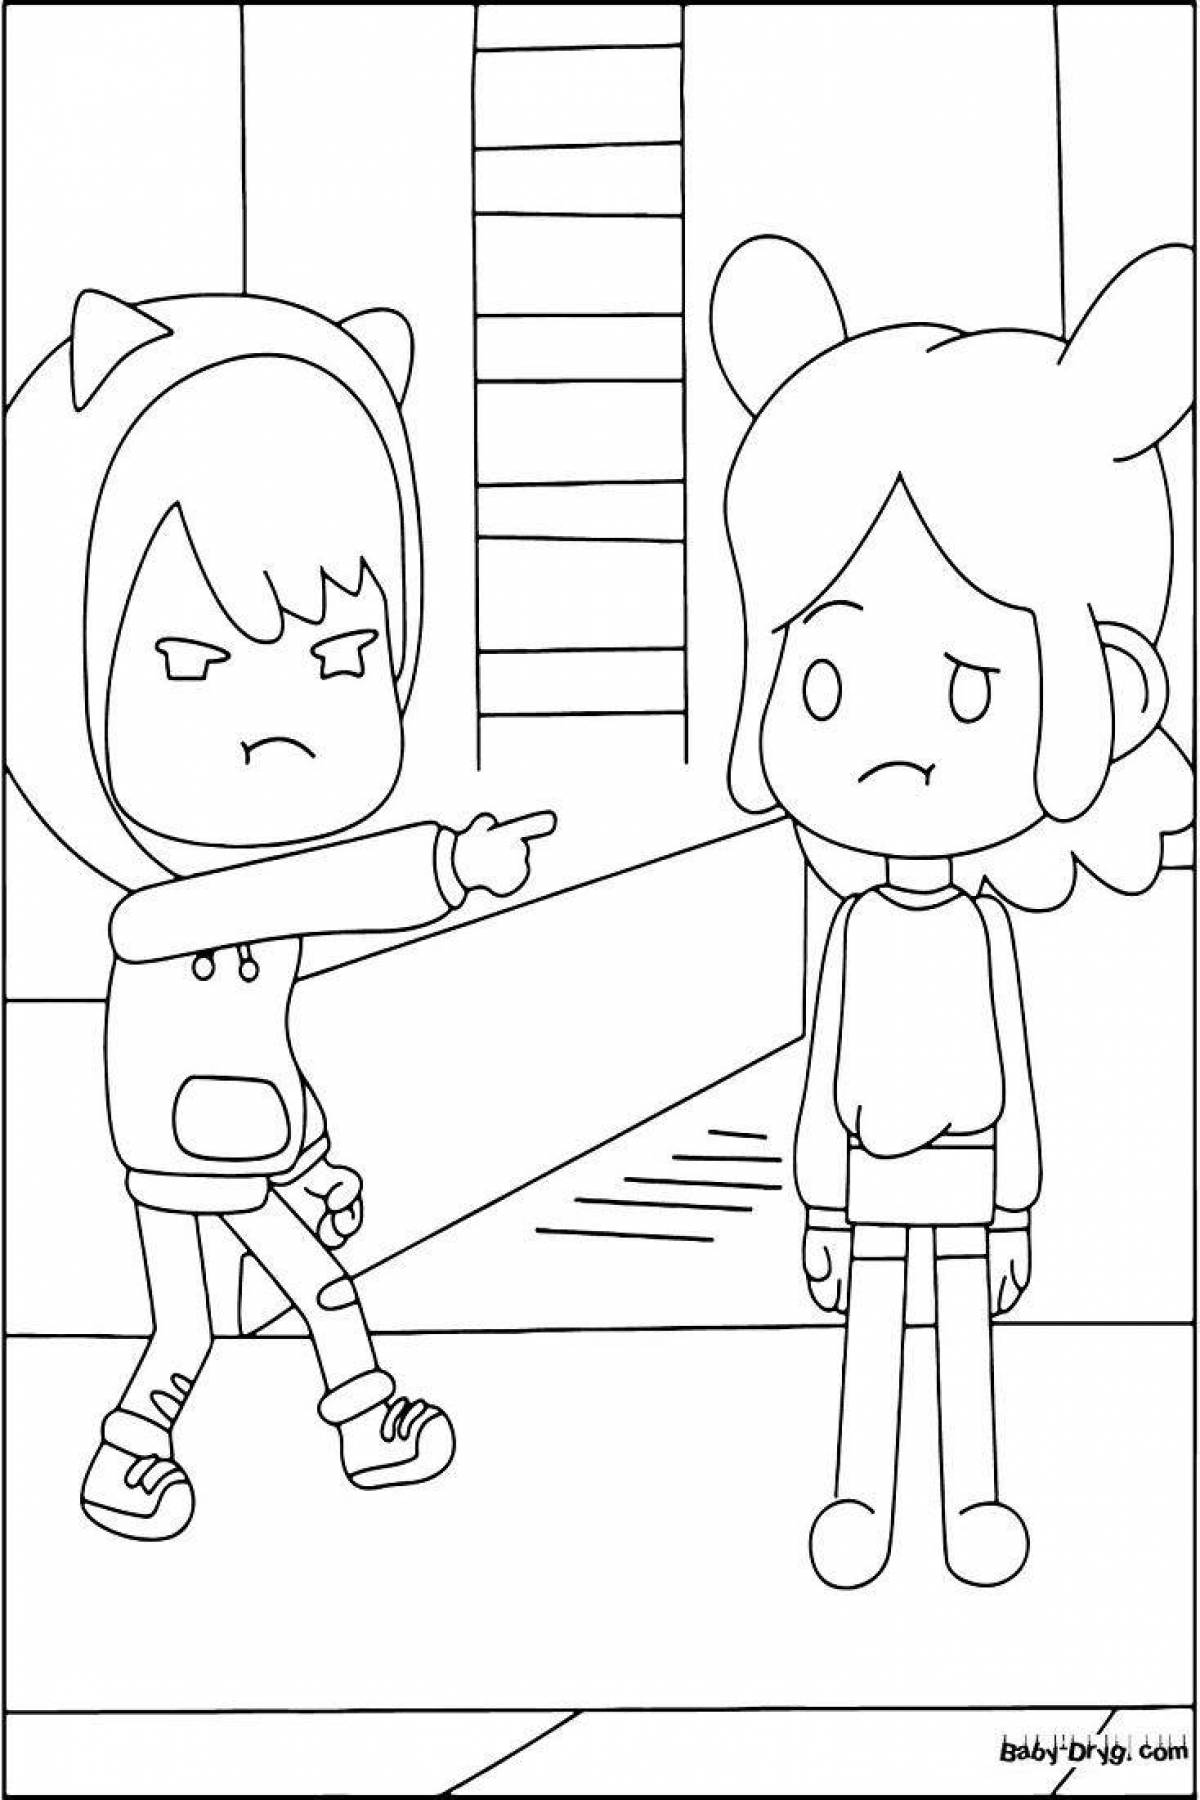 Boca boys animated coloring page